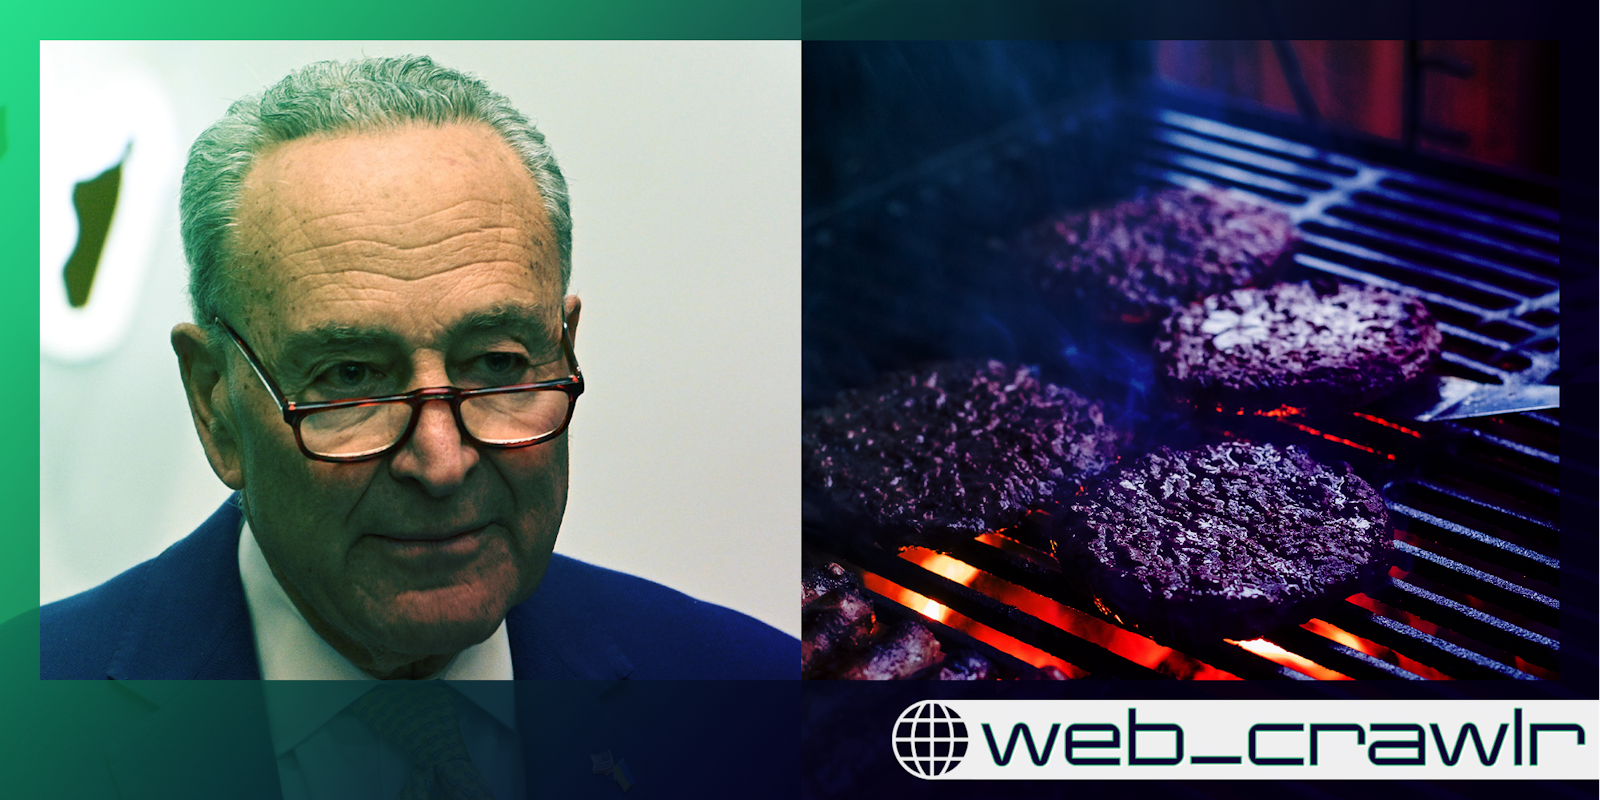 Chuck Schumer next to burgers on a grill. The Daily Dot newsletter web_crawlr logo is in the bottom right corner.